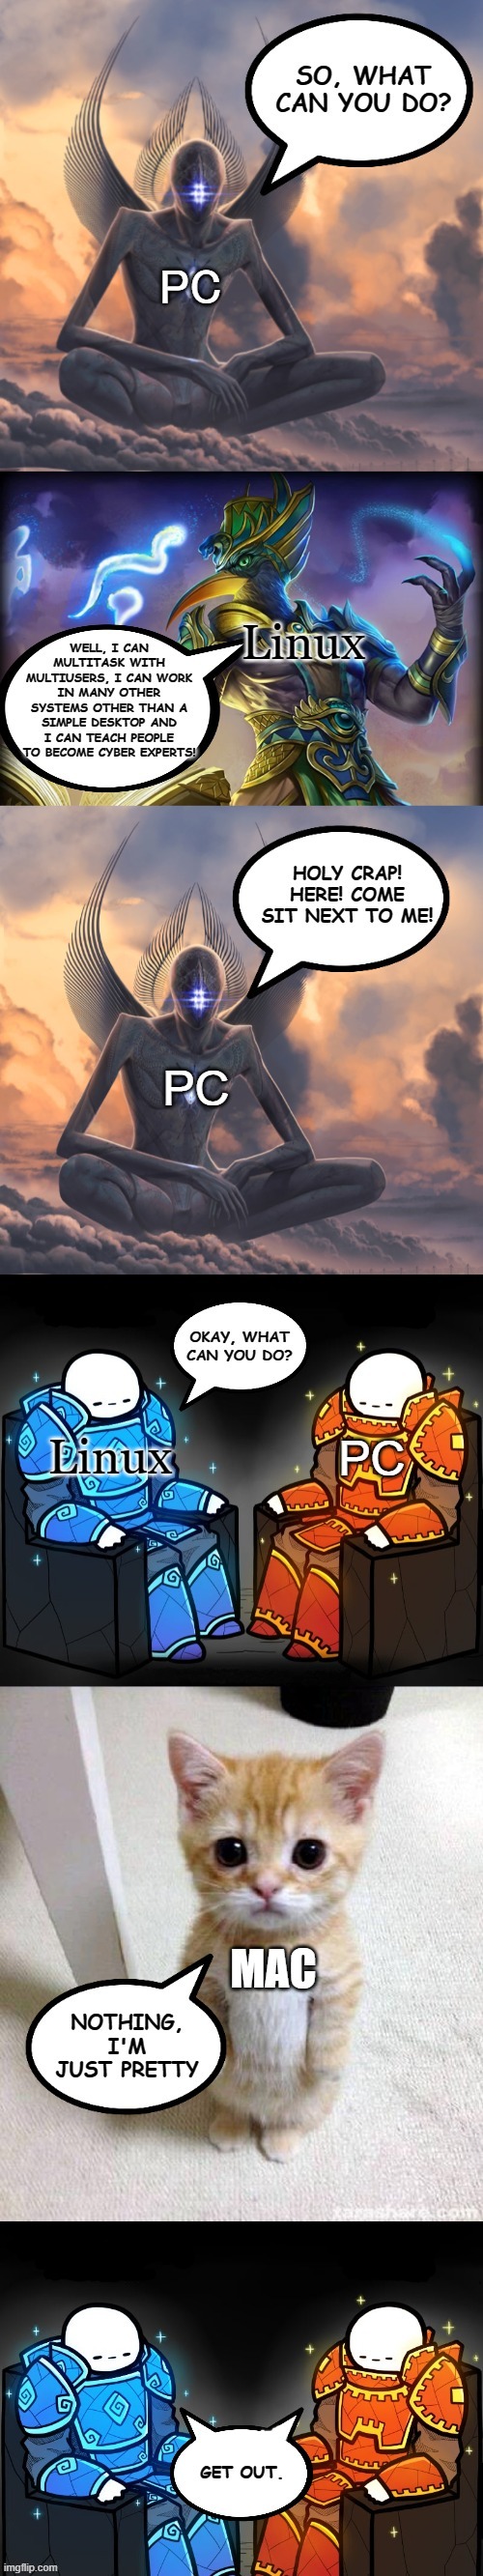 Linux do be holy xD | image tagged in linux,deities,memes,gods,pc,mac | made w/ Imgflip meme maker